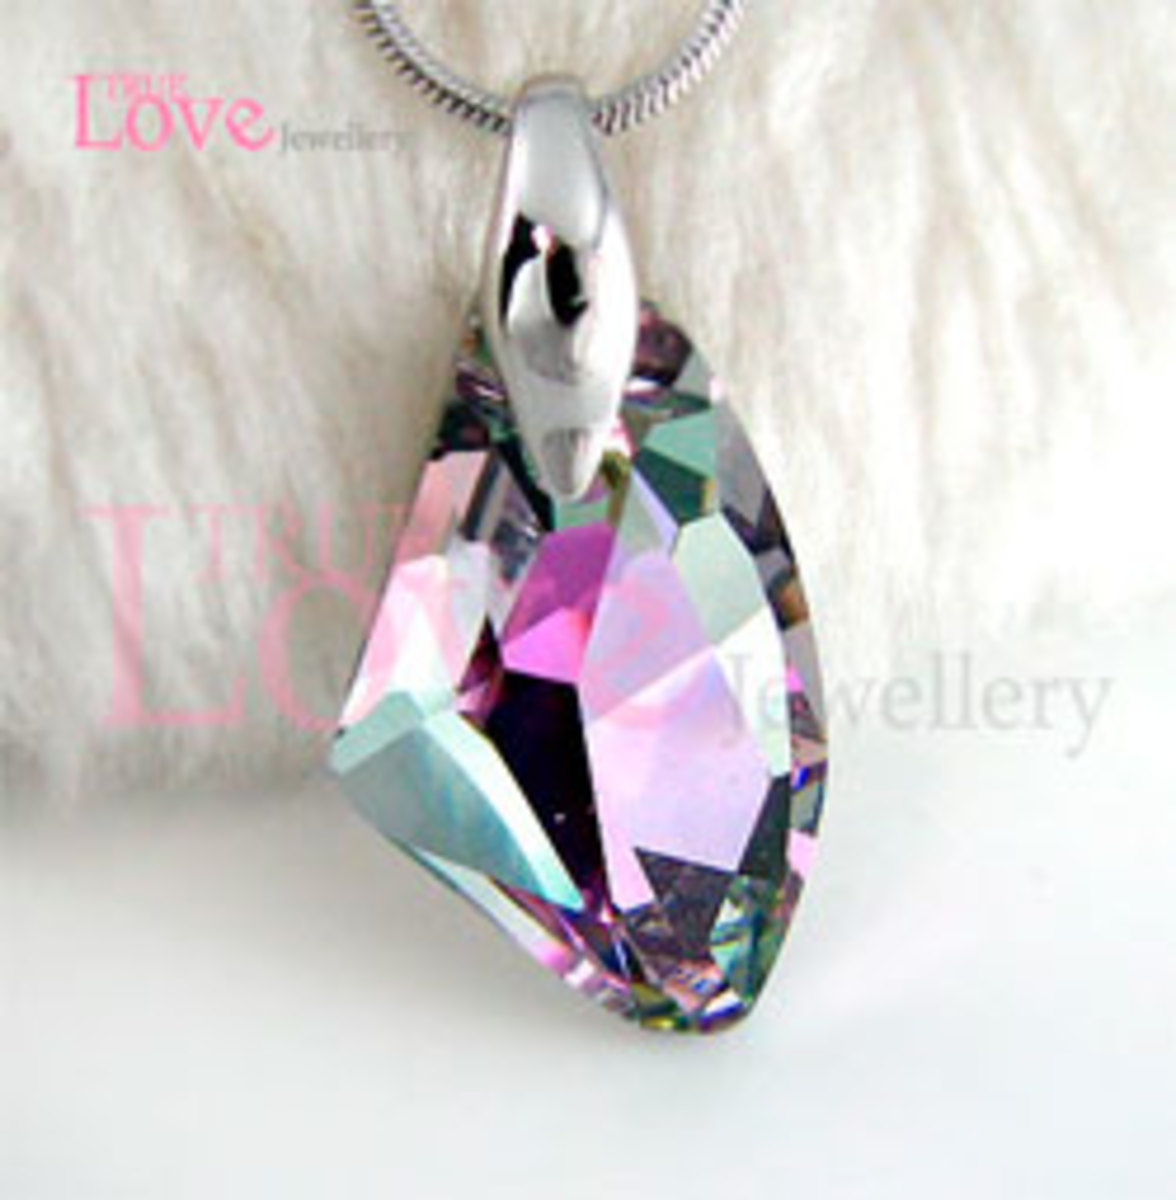 Another example of a beautiful Swarovski pendant with AB coating on it from Ebay for the easy-to-afford price of $12.99.